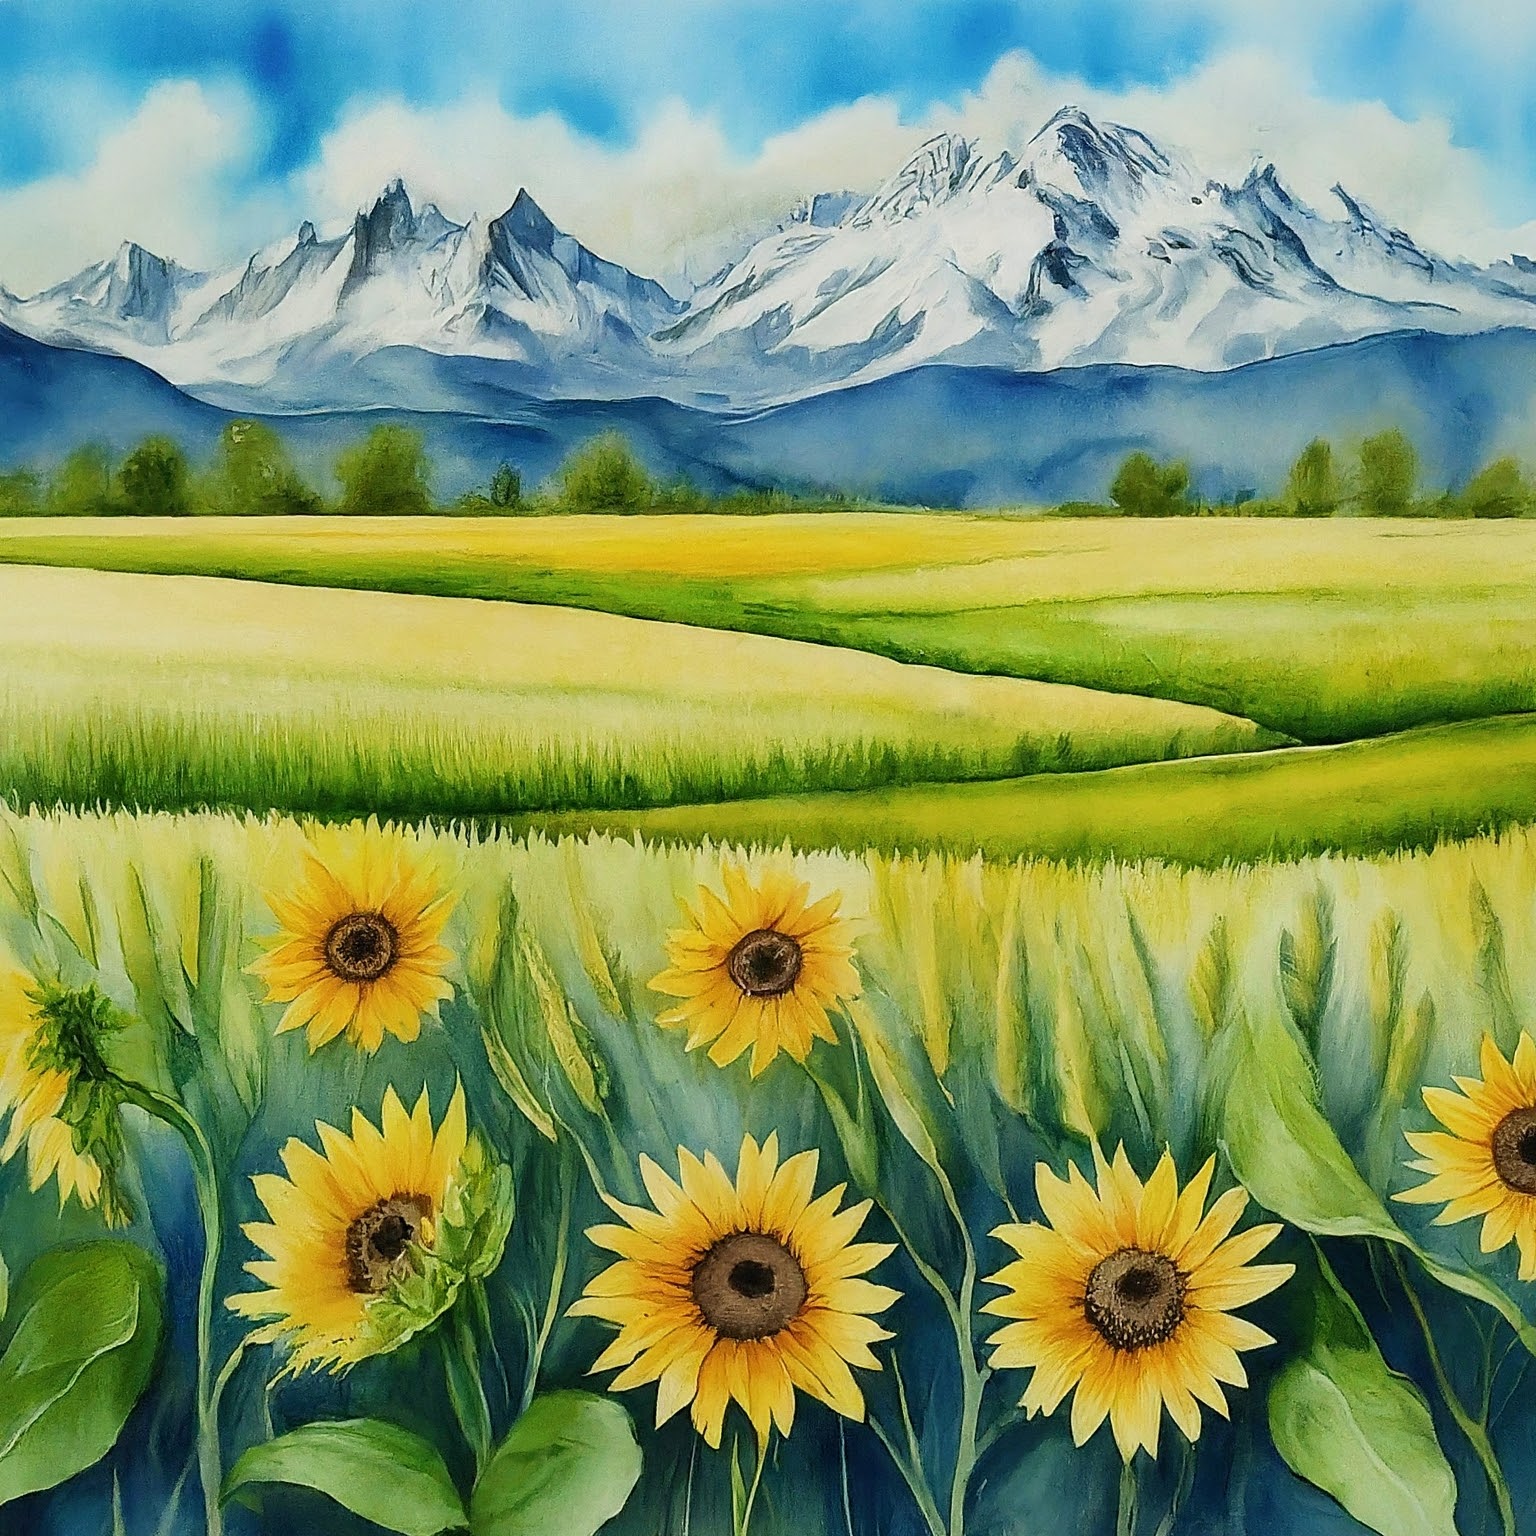 painting of mountains in the background with rolling hills of corn and sunflowers in the foreground